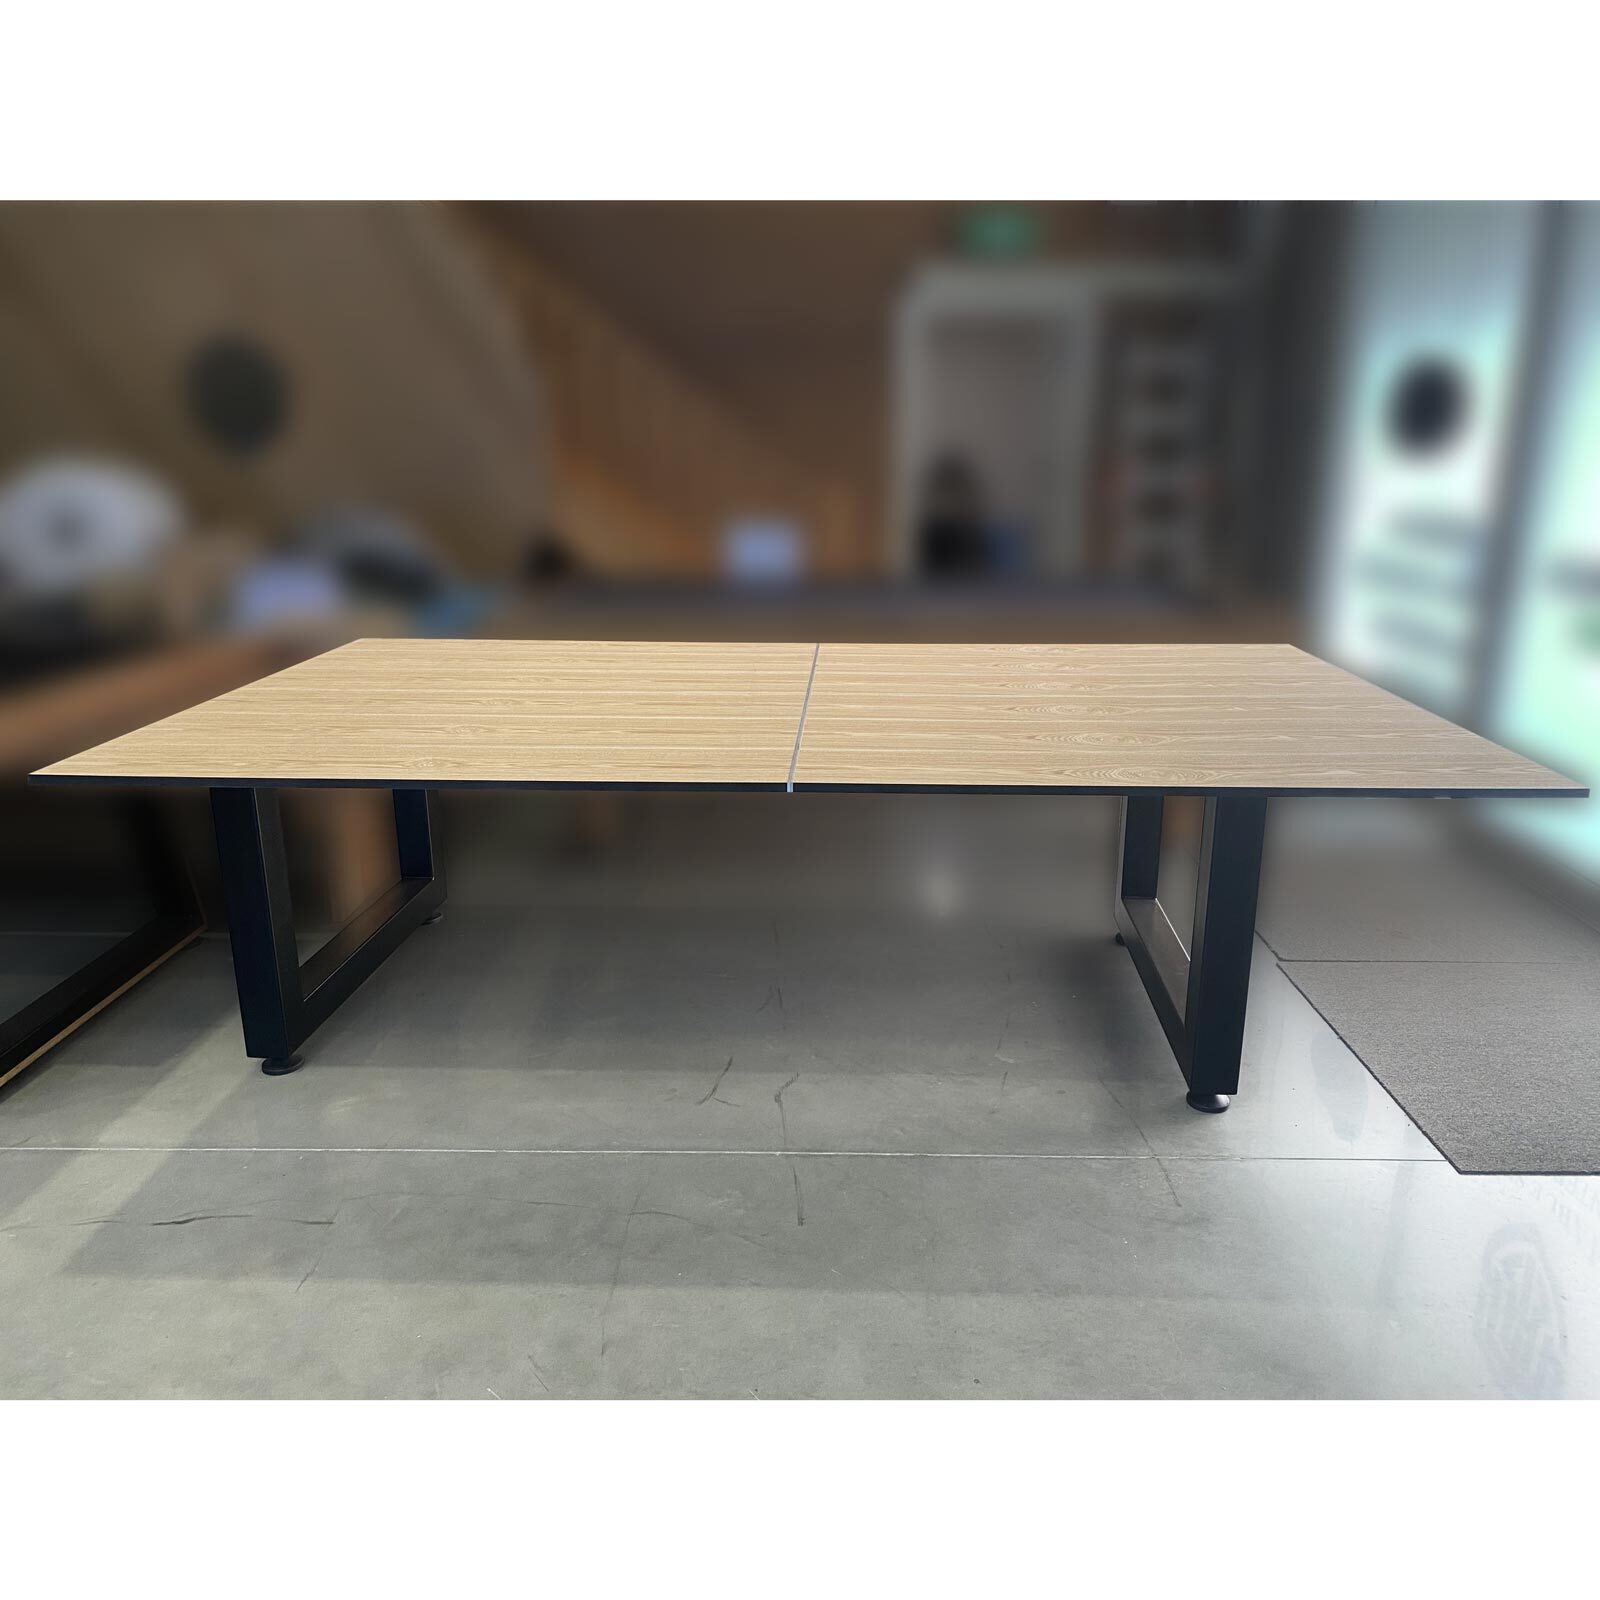 Dual function table tennis / dining top